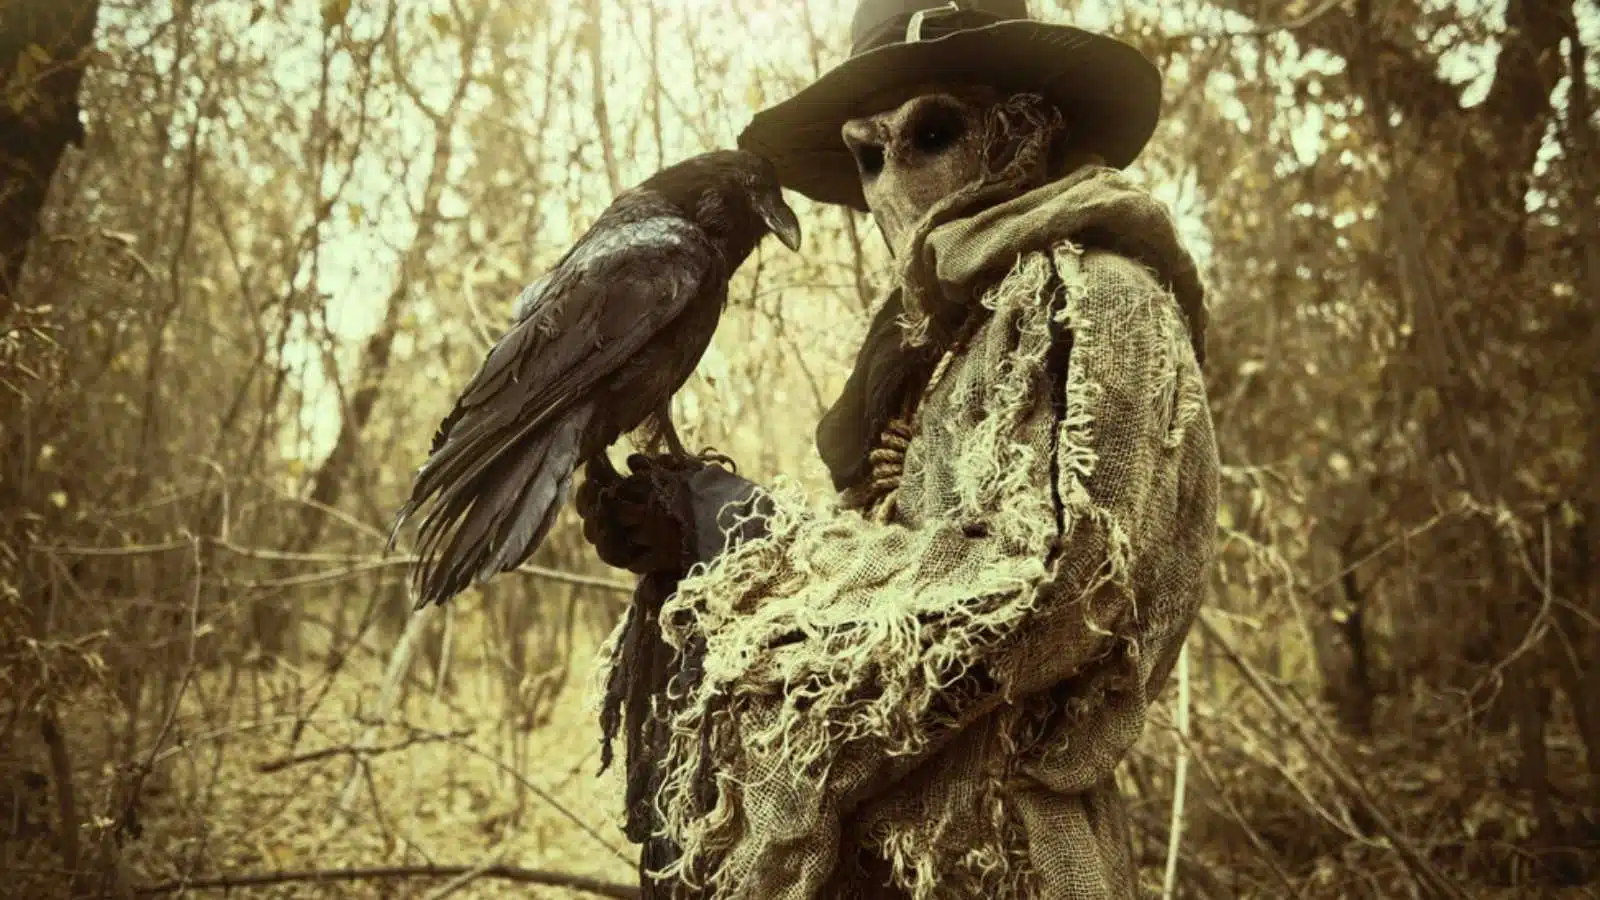 A terrible forest sorcerer with a canvas bag on his head and in a sackcloth robe stands in a dense forest with a black raven on his hand. Scarecrow. Halloween Tales. Horror, thriller.